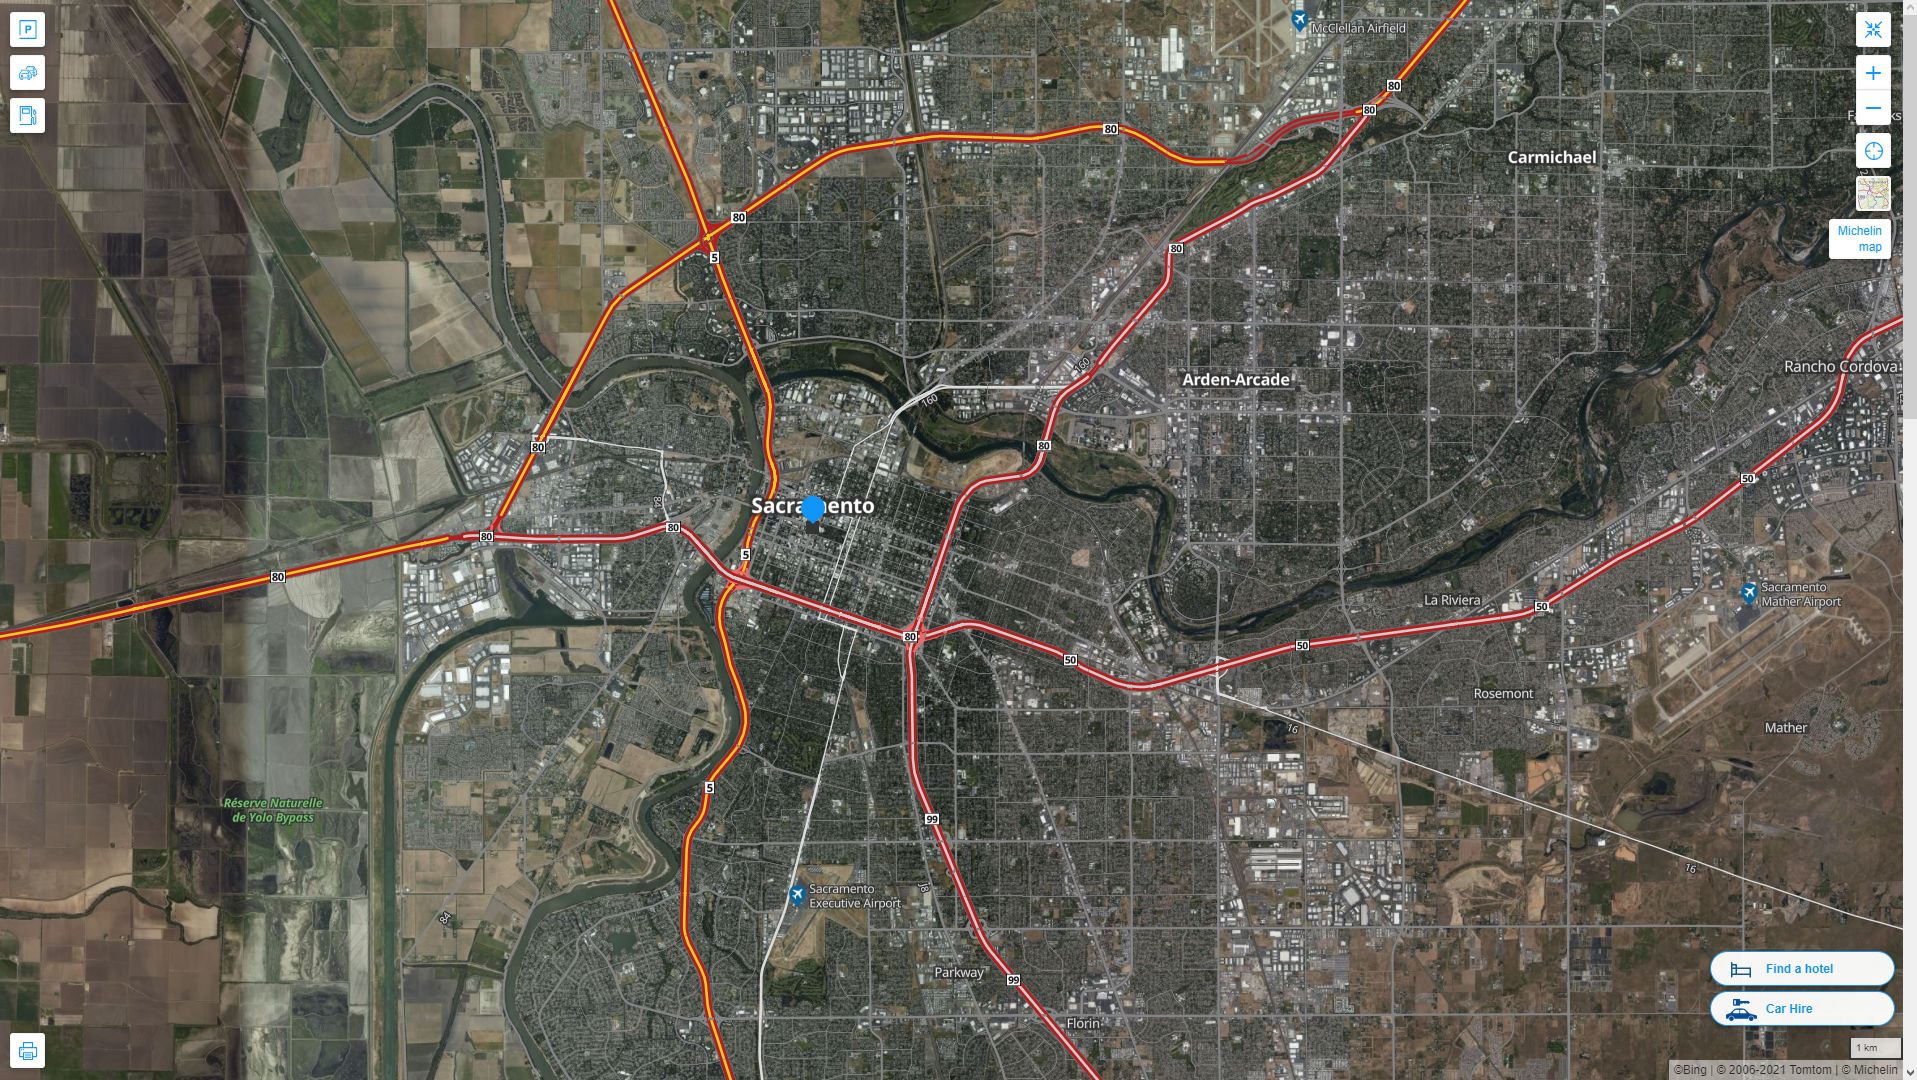 Sacramento California Highway and Road Map with Satellite View